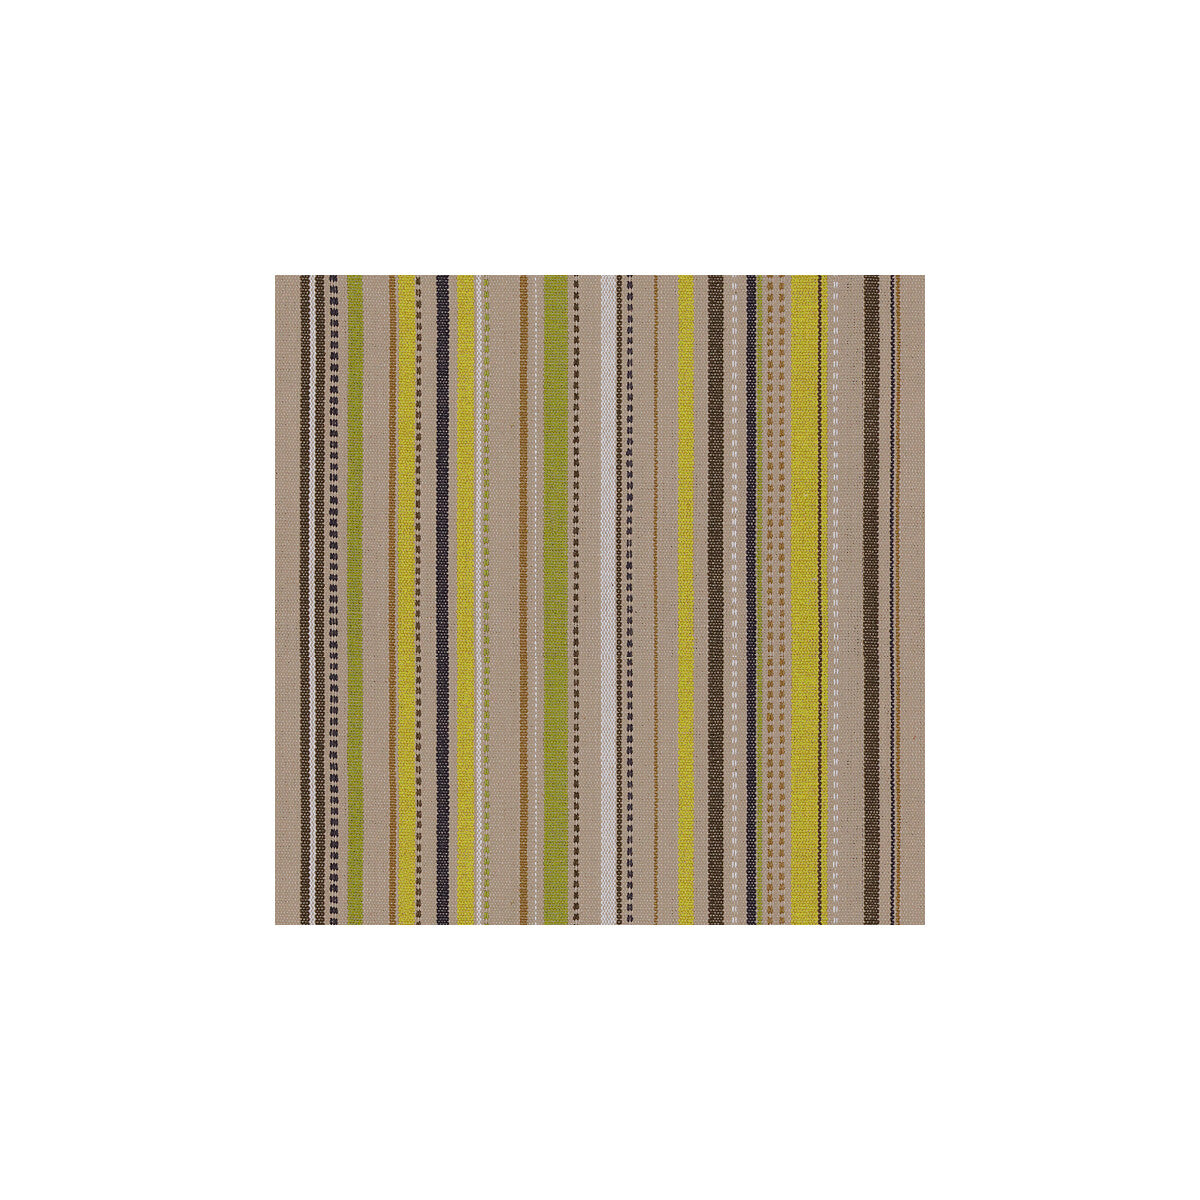 Cusco Stripe fabric in pistachio color - pattern 32507.316.0 - by Kravet Design in the Jonathan Adler Utopia collection